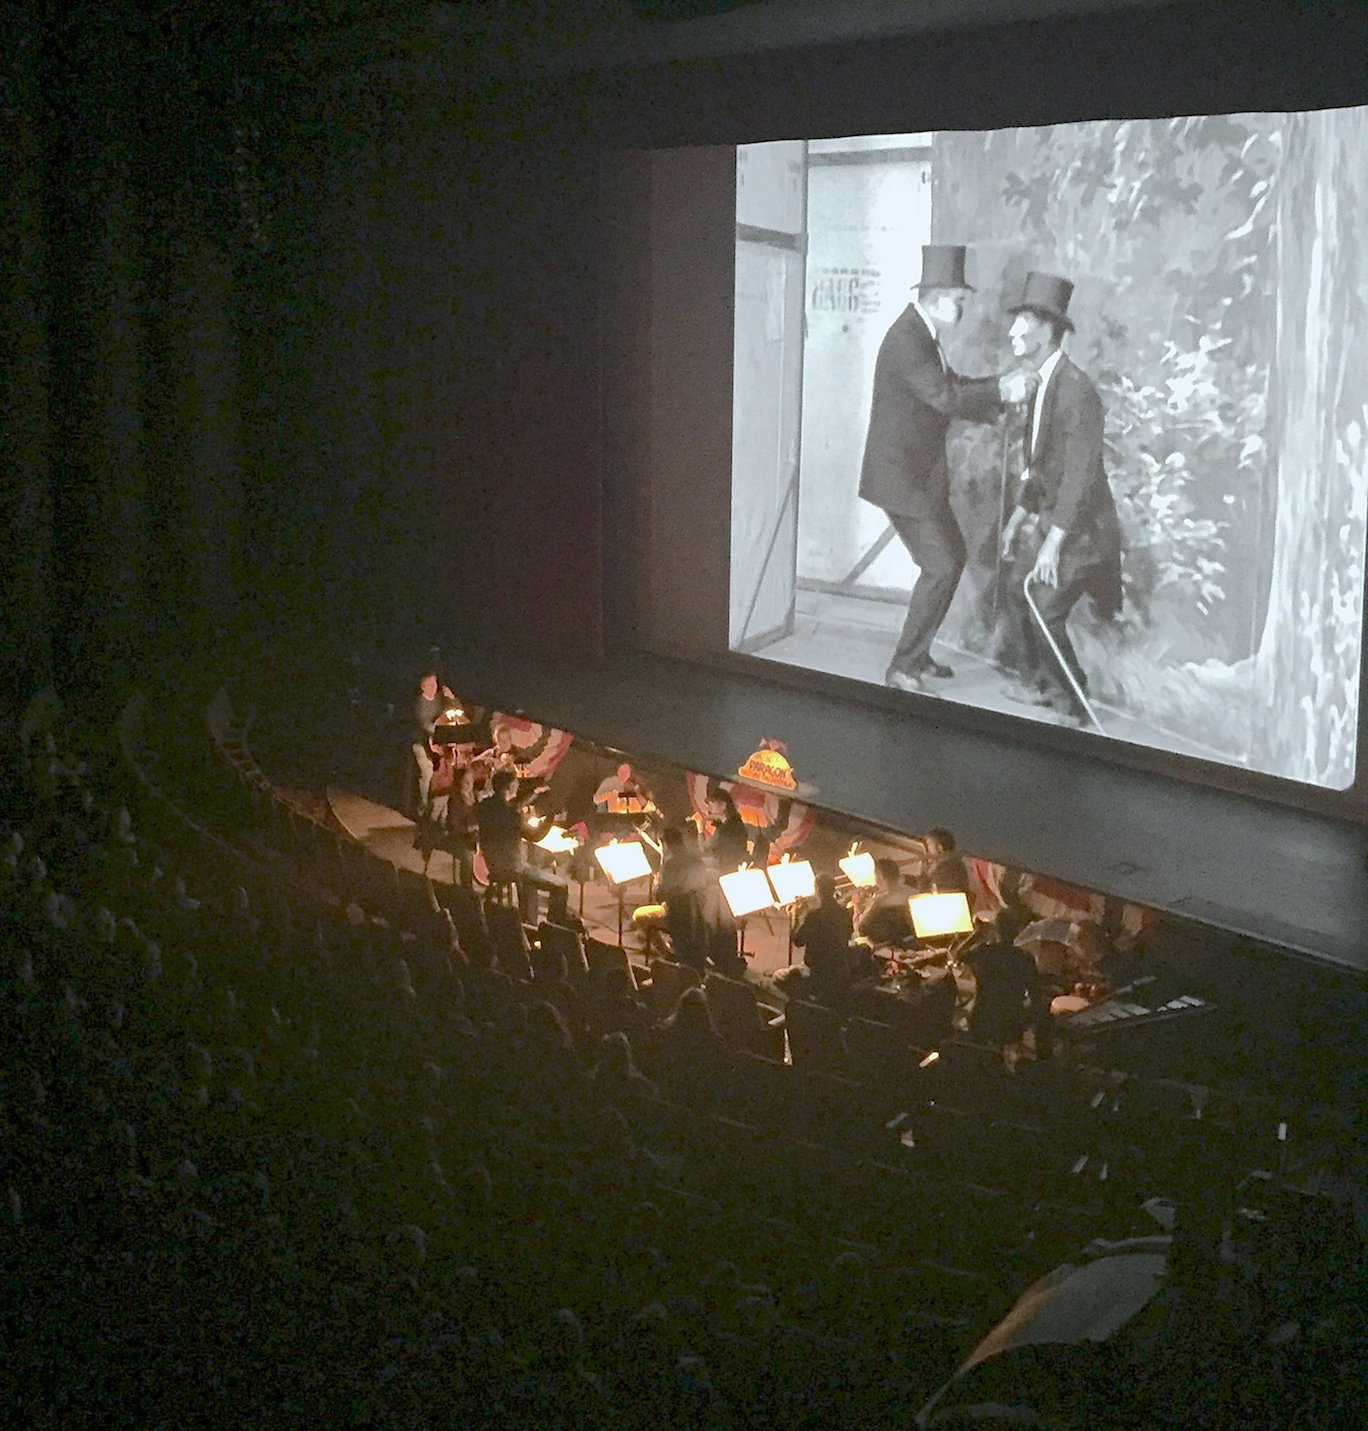 The Paragon Ragtime Orchestra accompanying a silent film at the Walton Arts Center.